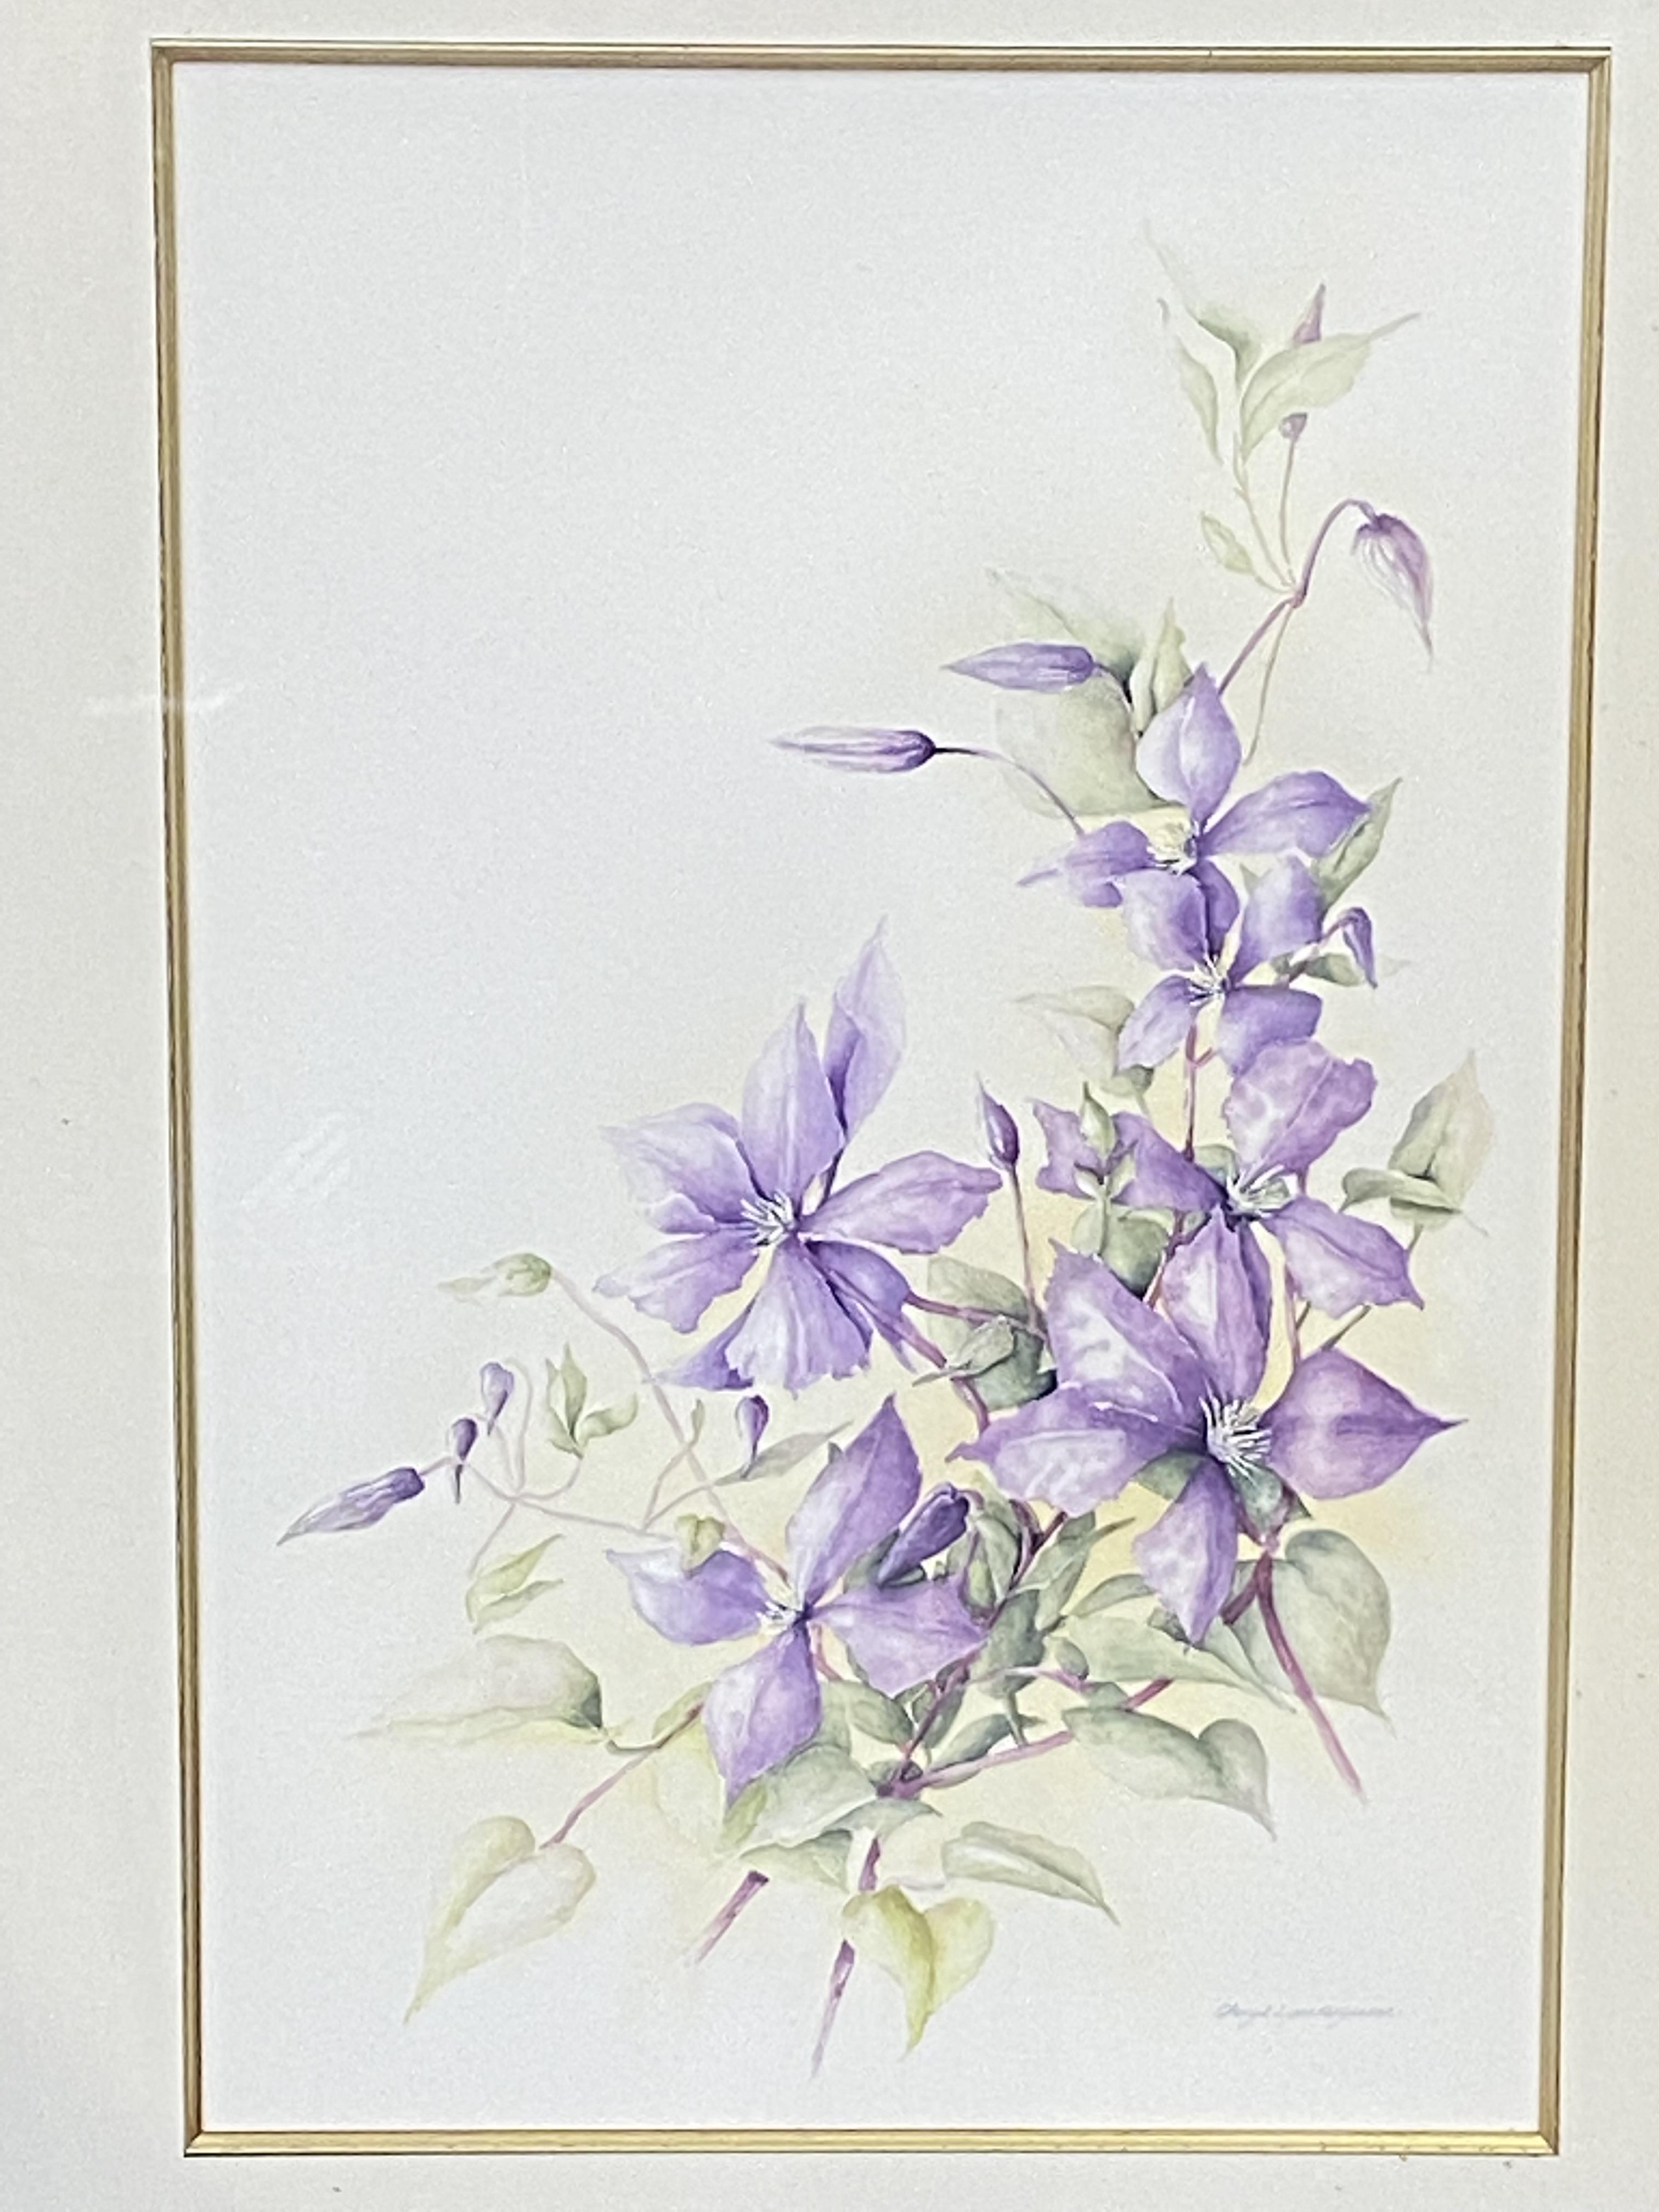 Framed watercolour of flowers - Image 3 of 3